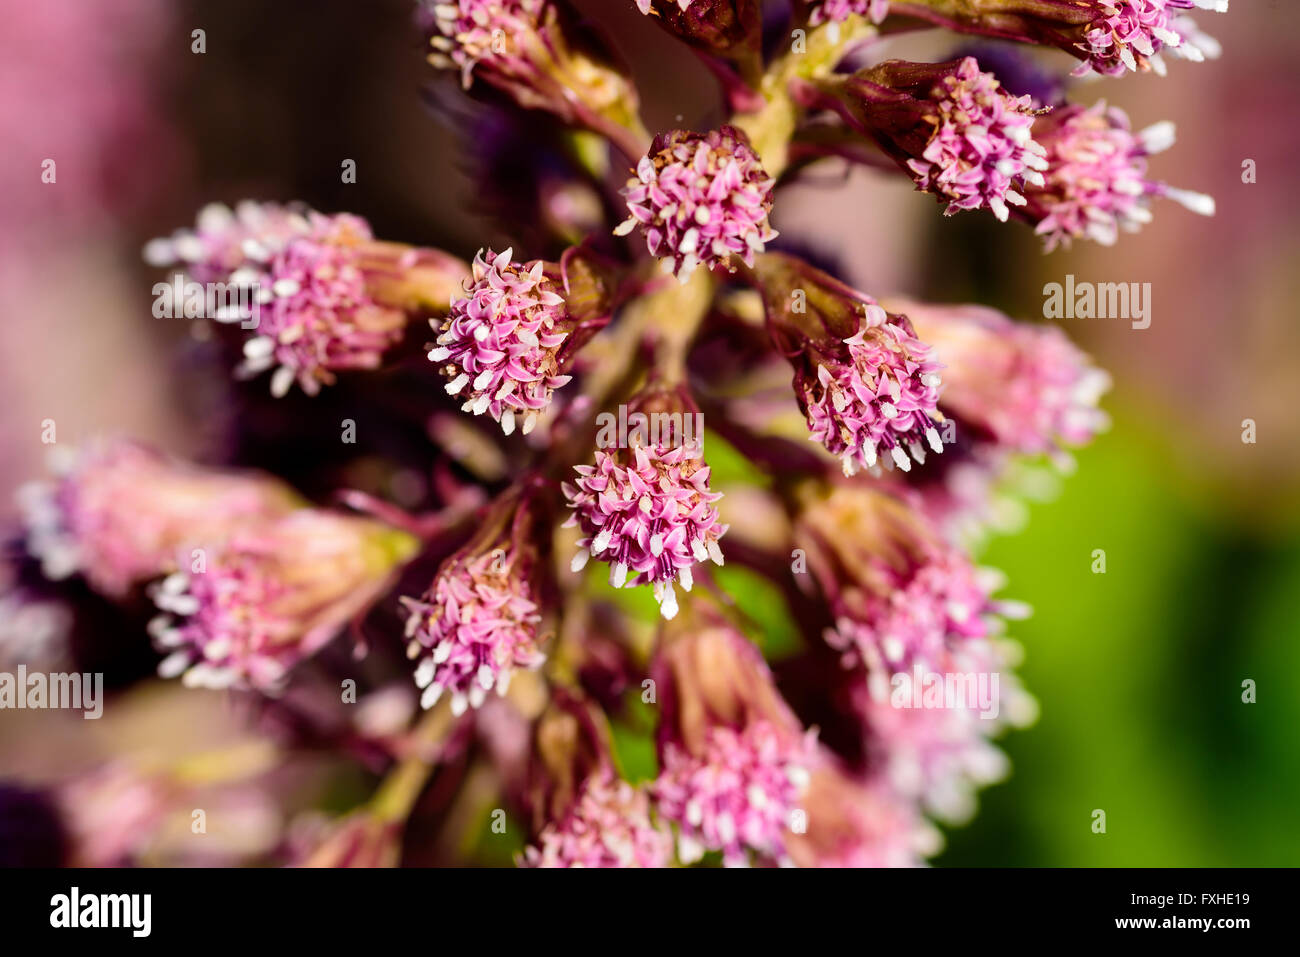 Petasites hybridus, the butterbur, close up of the pink inflorescences clusters of flowers. Also known as bog rhubarb, devils ha Stock Photo